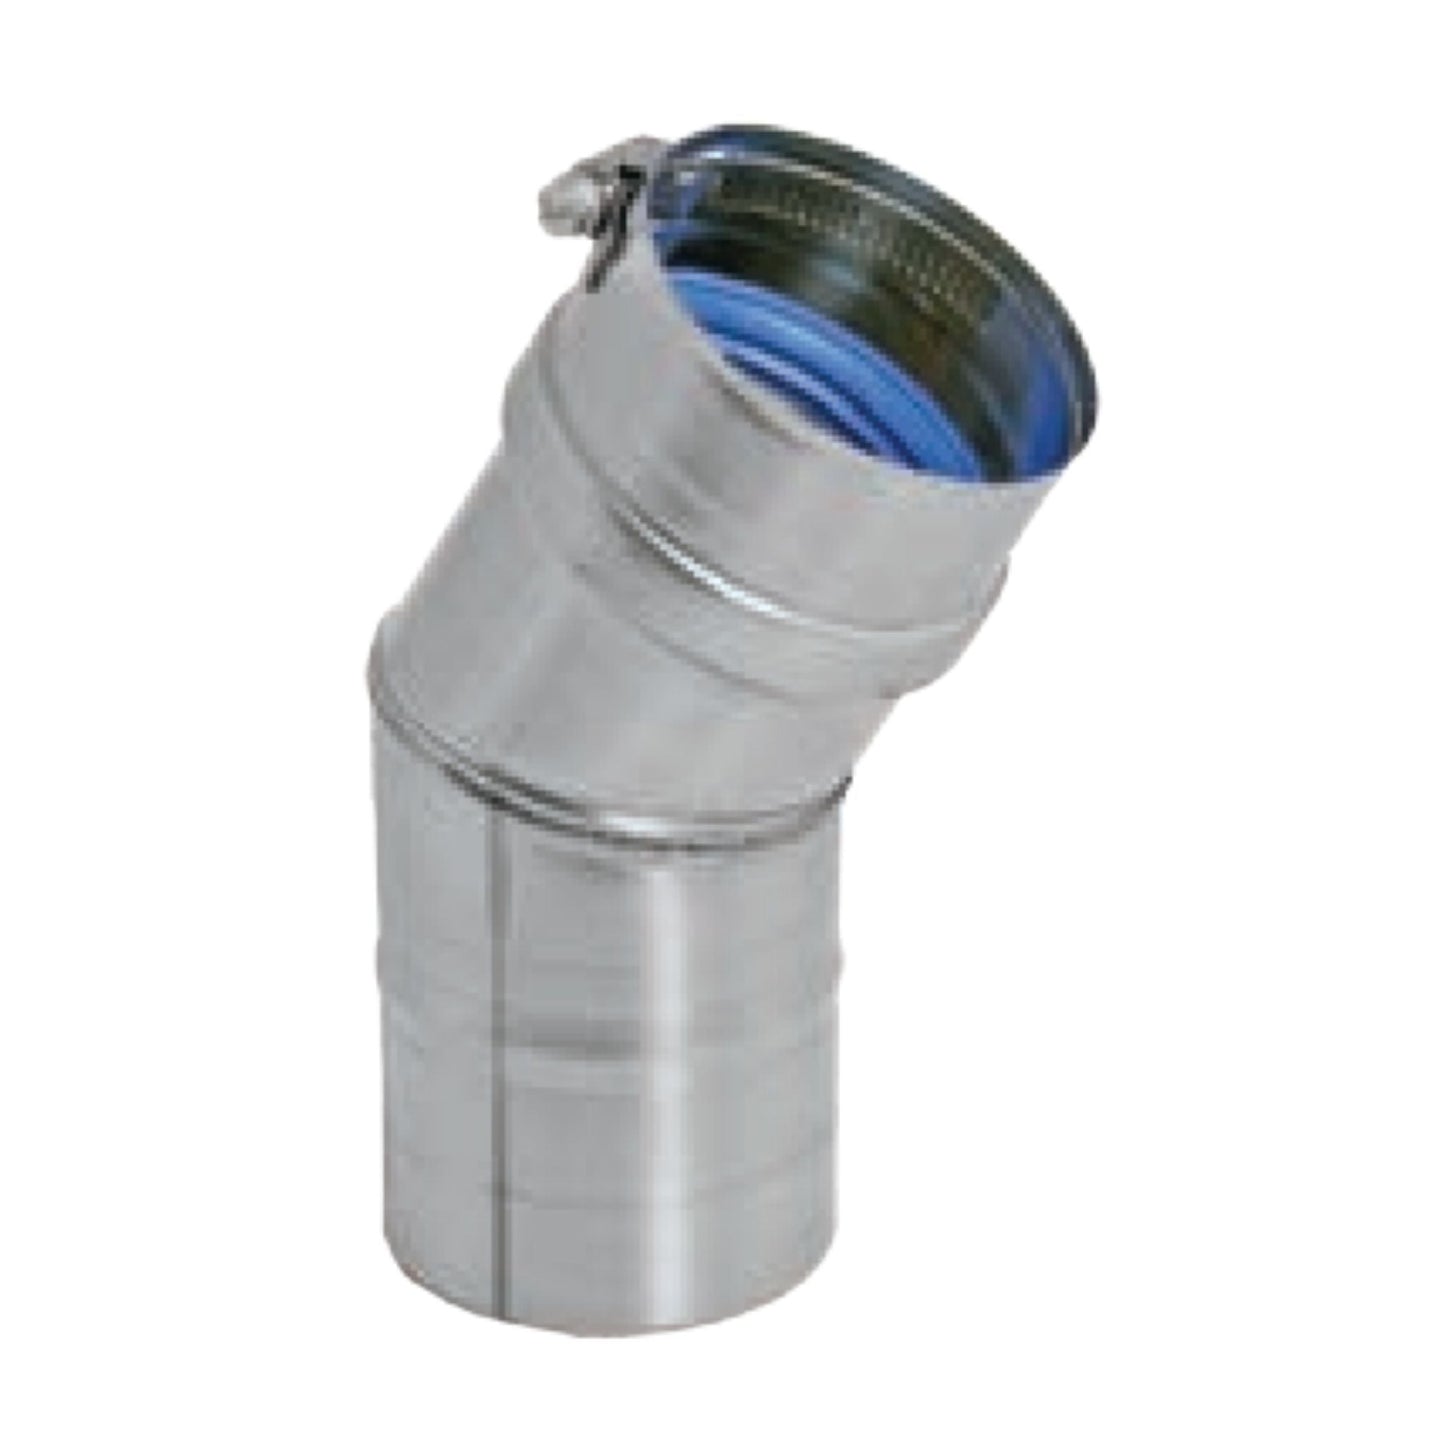 DuraVent FasNSeal 16" 30 Degree 316L Stainless Steel Elbow